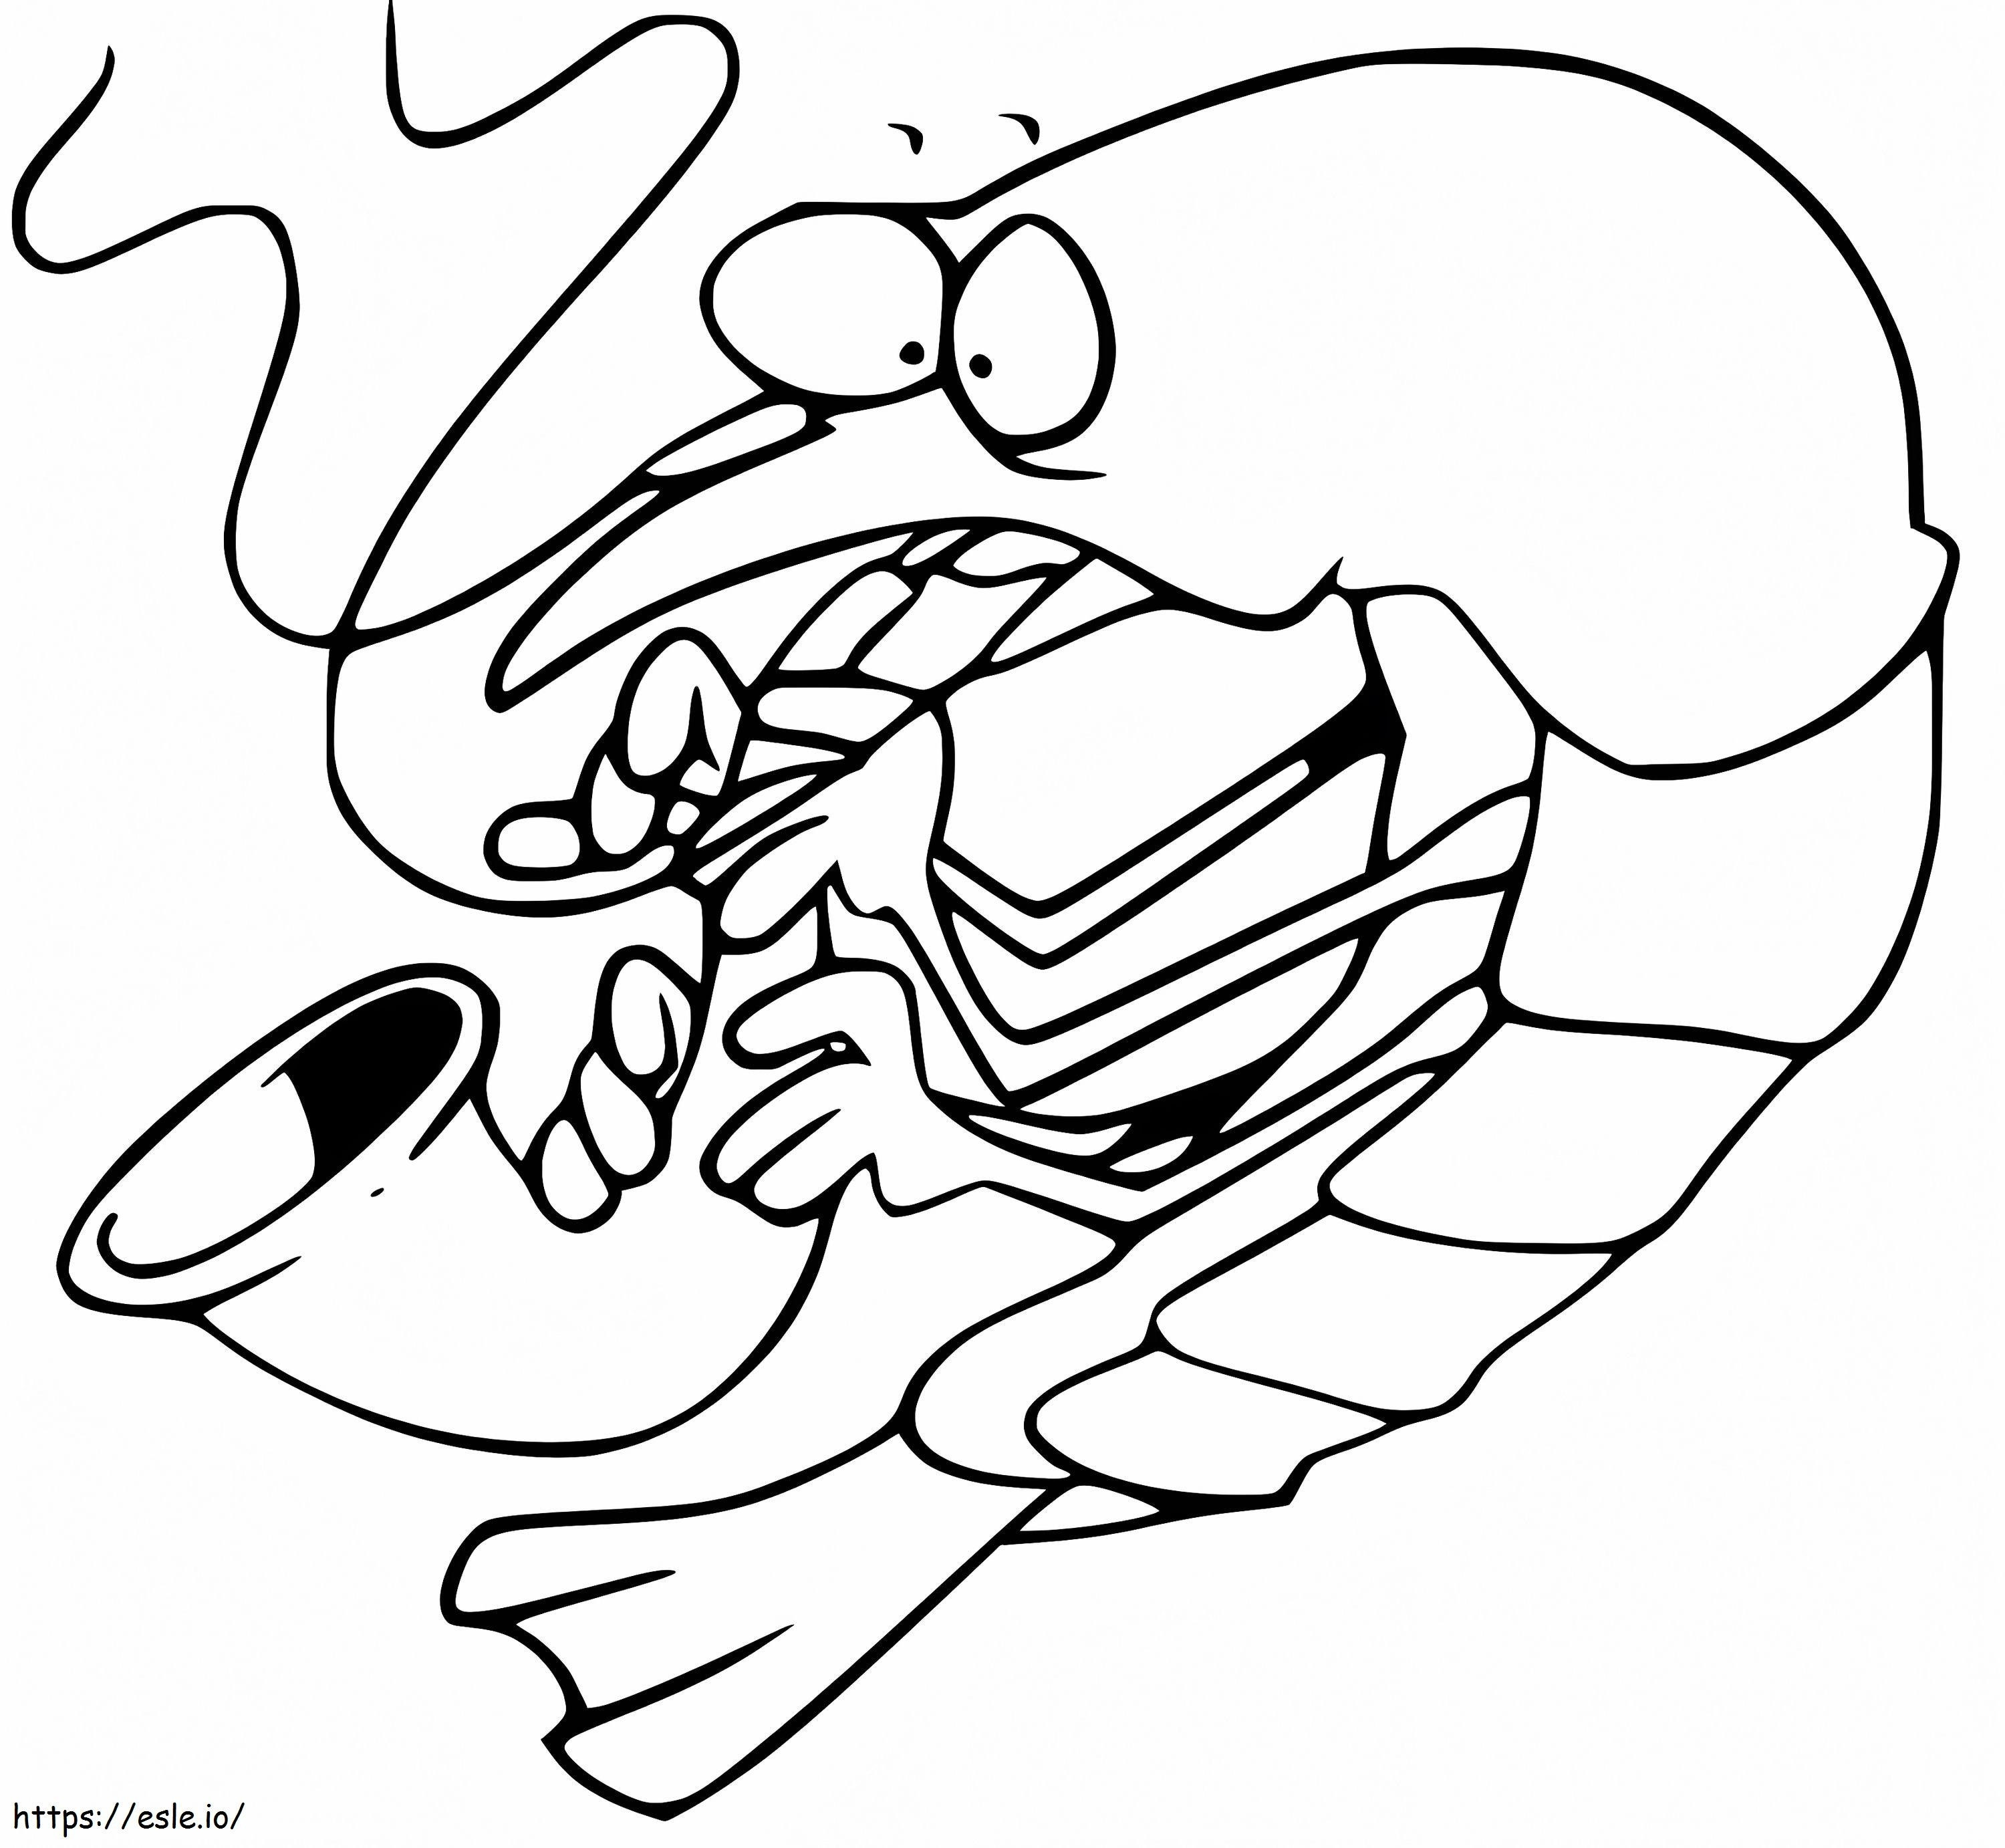 Shrimp Playing Trumpet coloring page